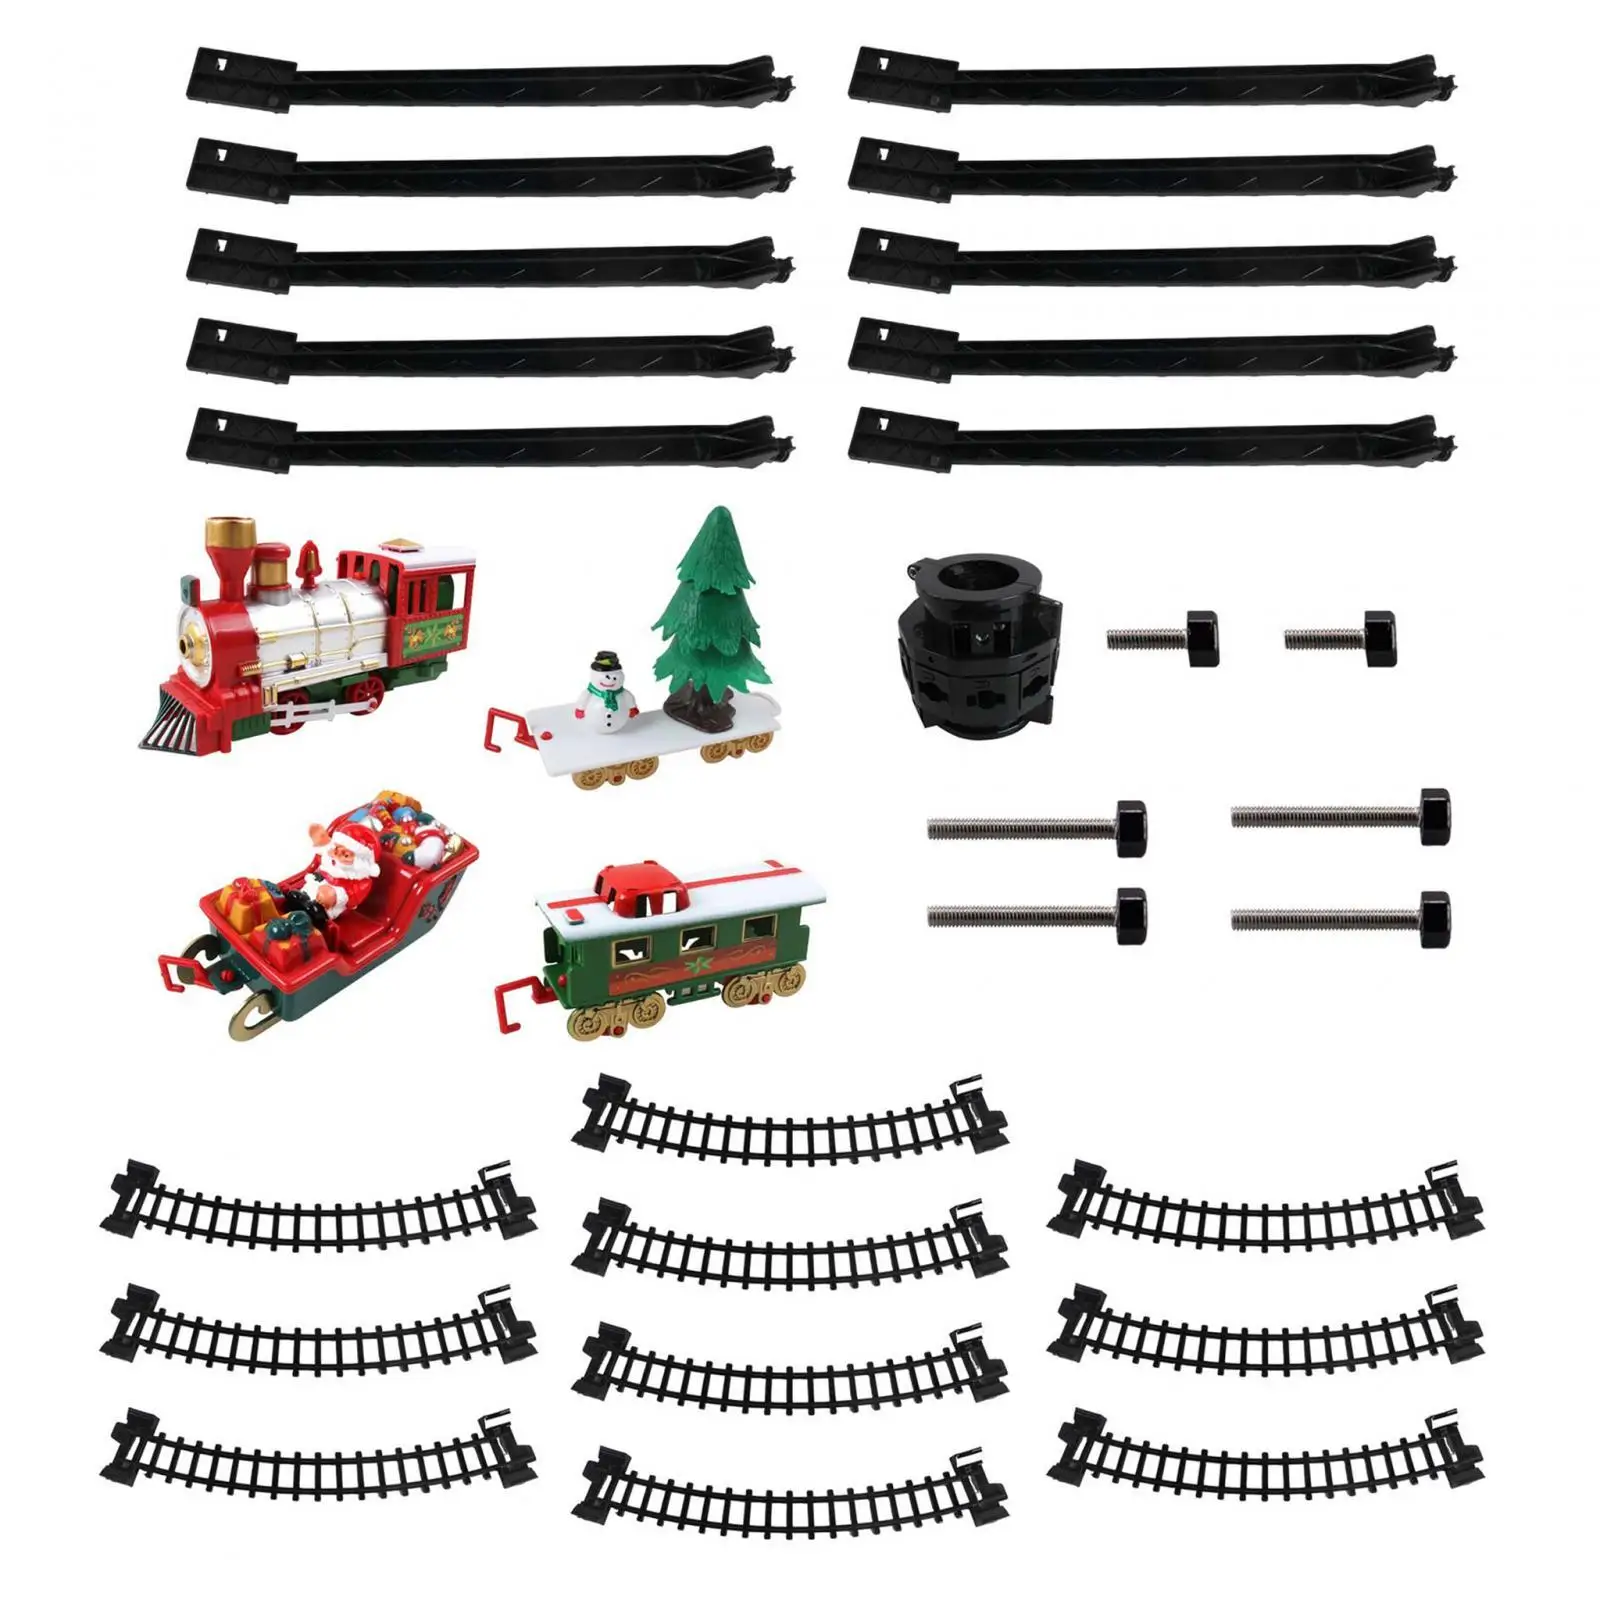 Kids Funny Train Set Small Trains Track DIY Cargo Cars and 10 Tracks Decor Train Toy for Boy Children Girls Kids 4 5 6 Year Old